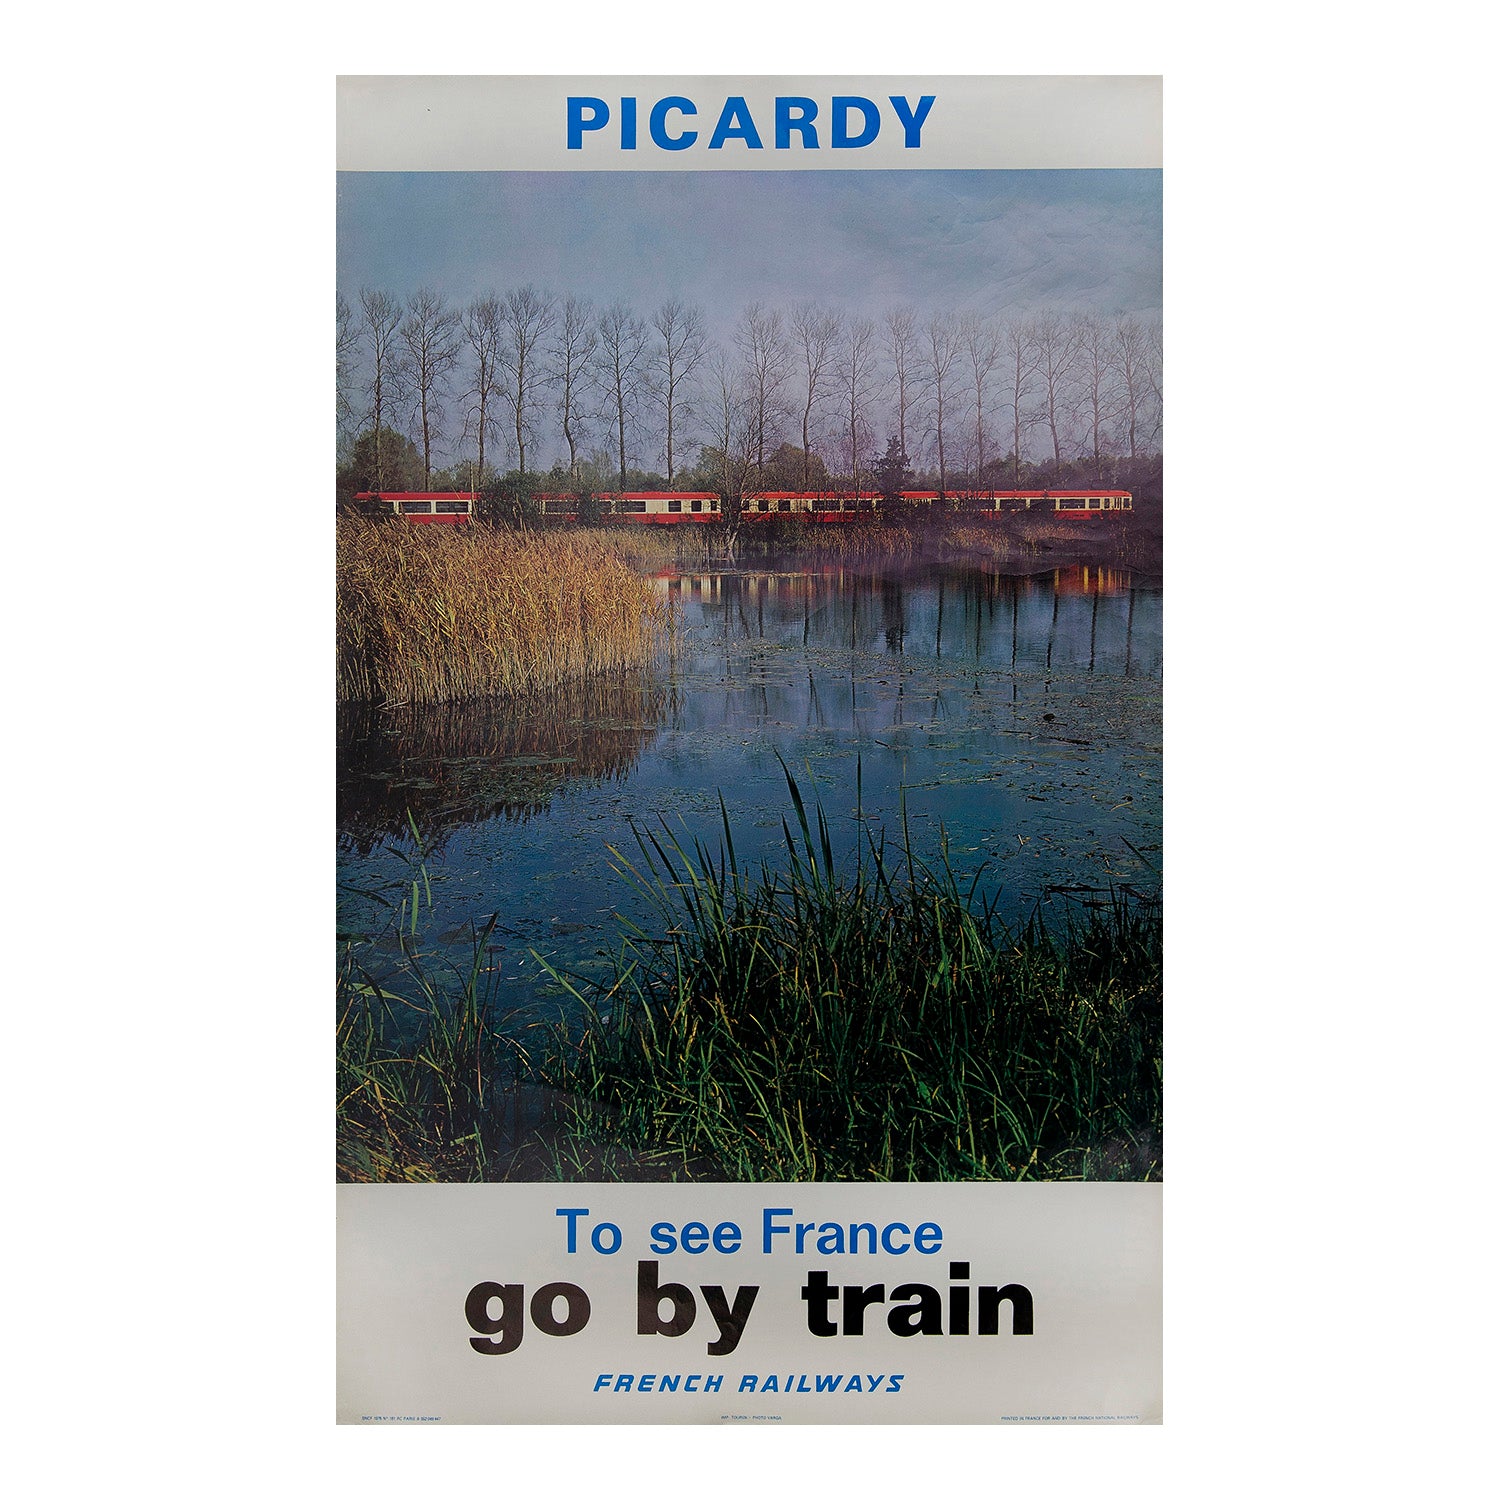 Picardy. To see France go by train. French Railways